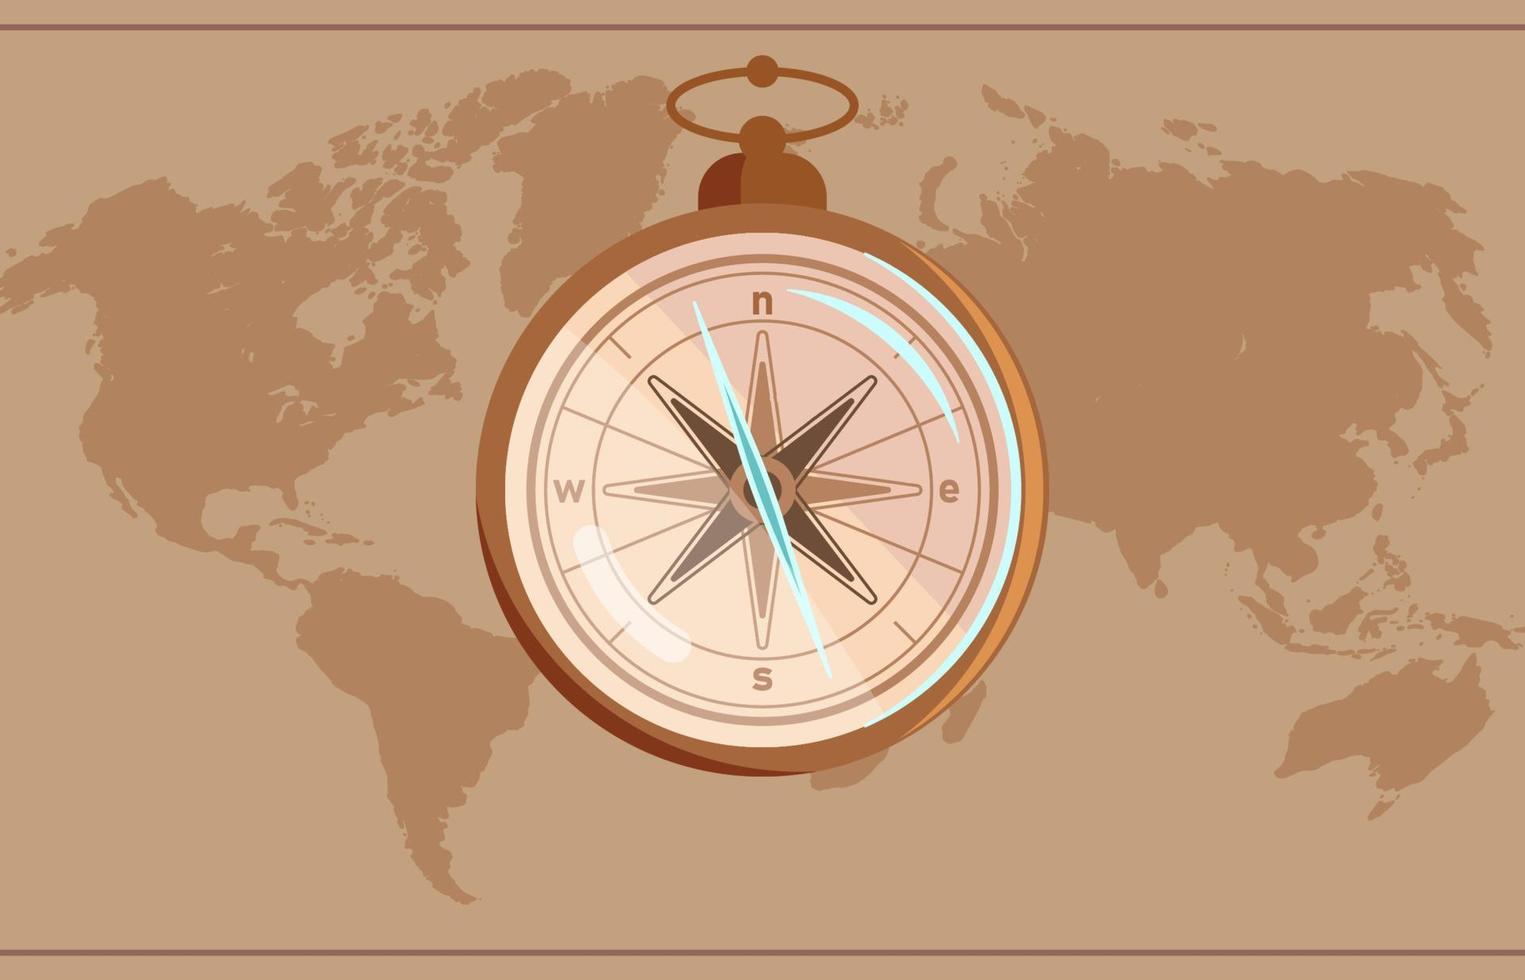 Isolated brown compass symbol flat style and with the image of the directions compass on world map background flat vector illustration.